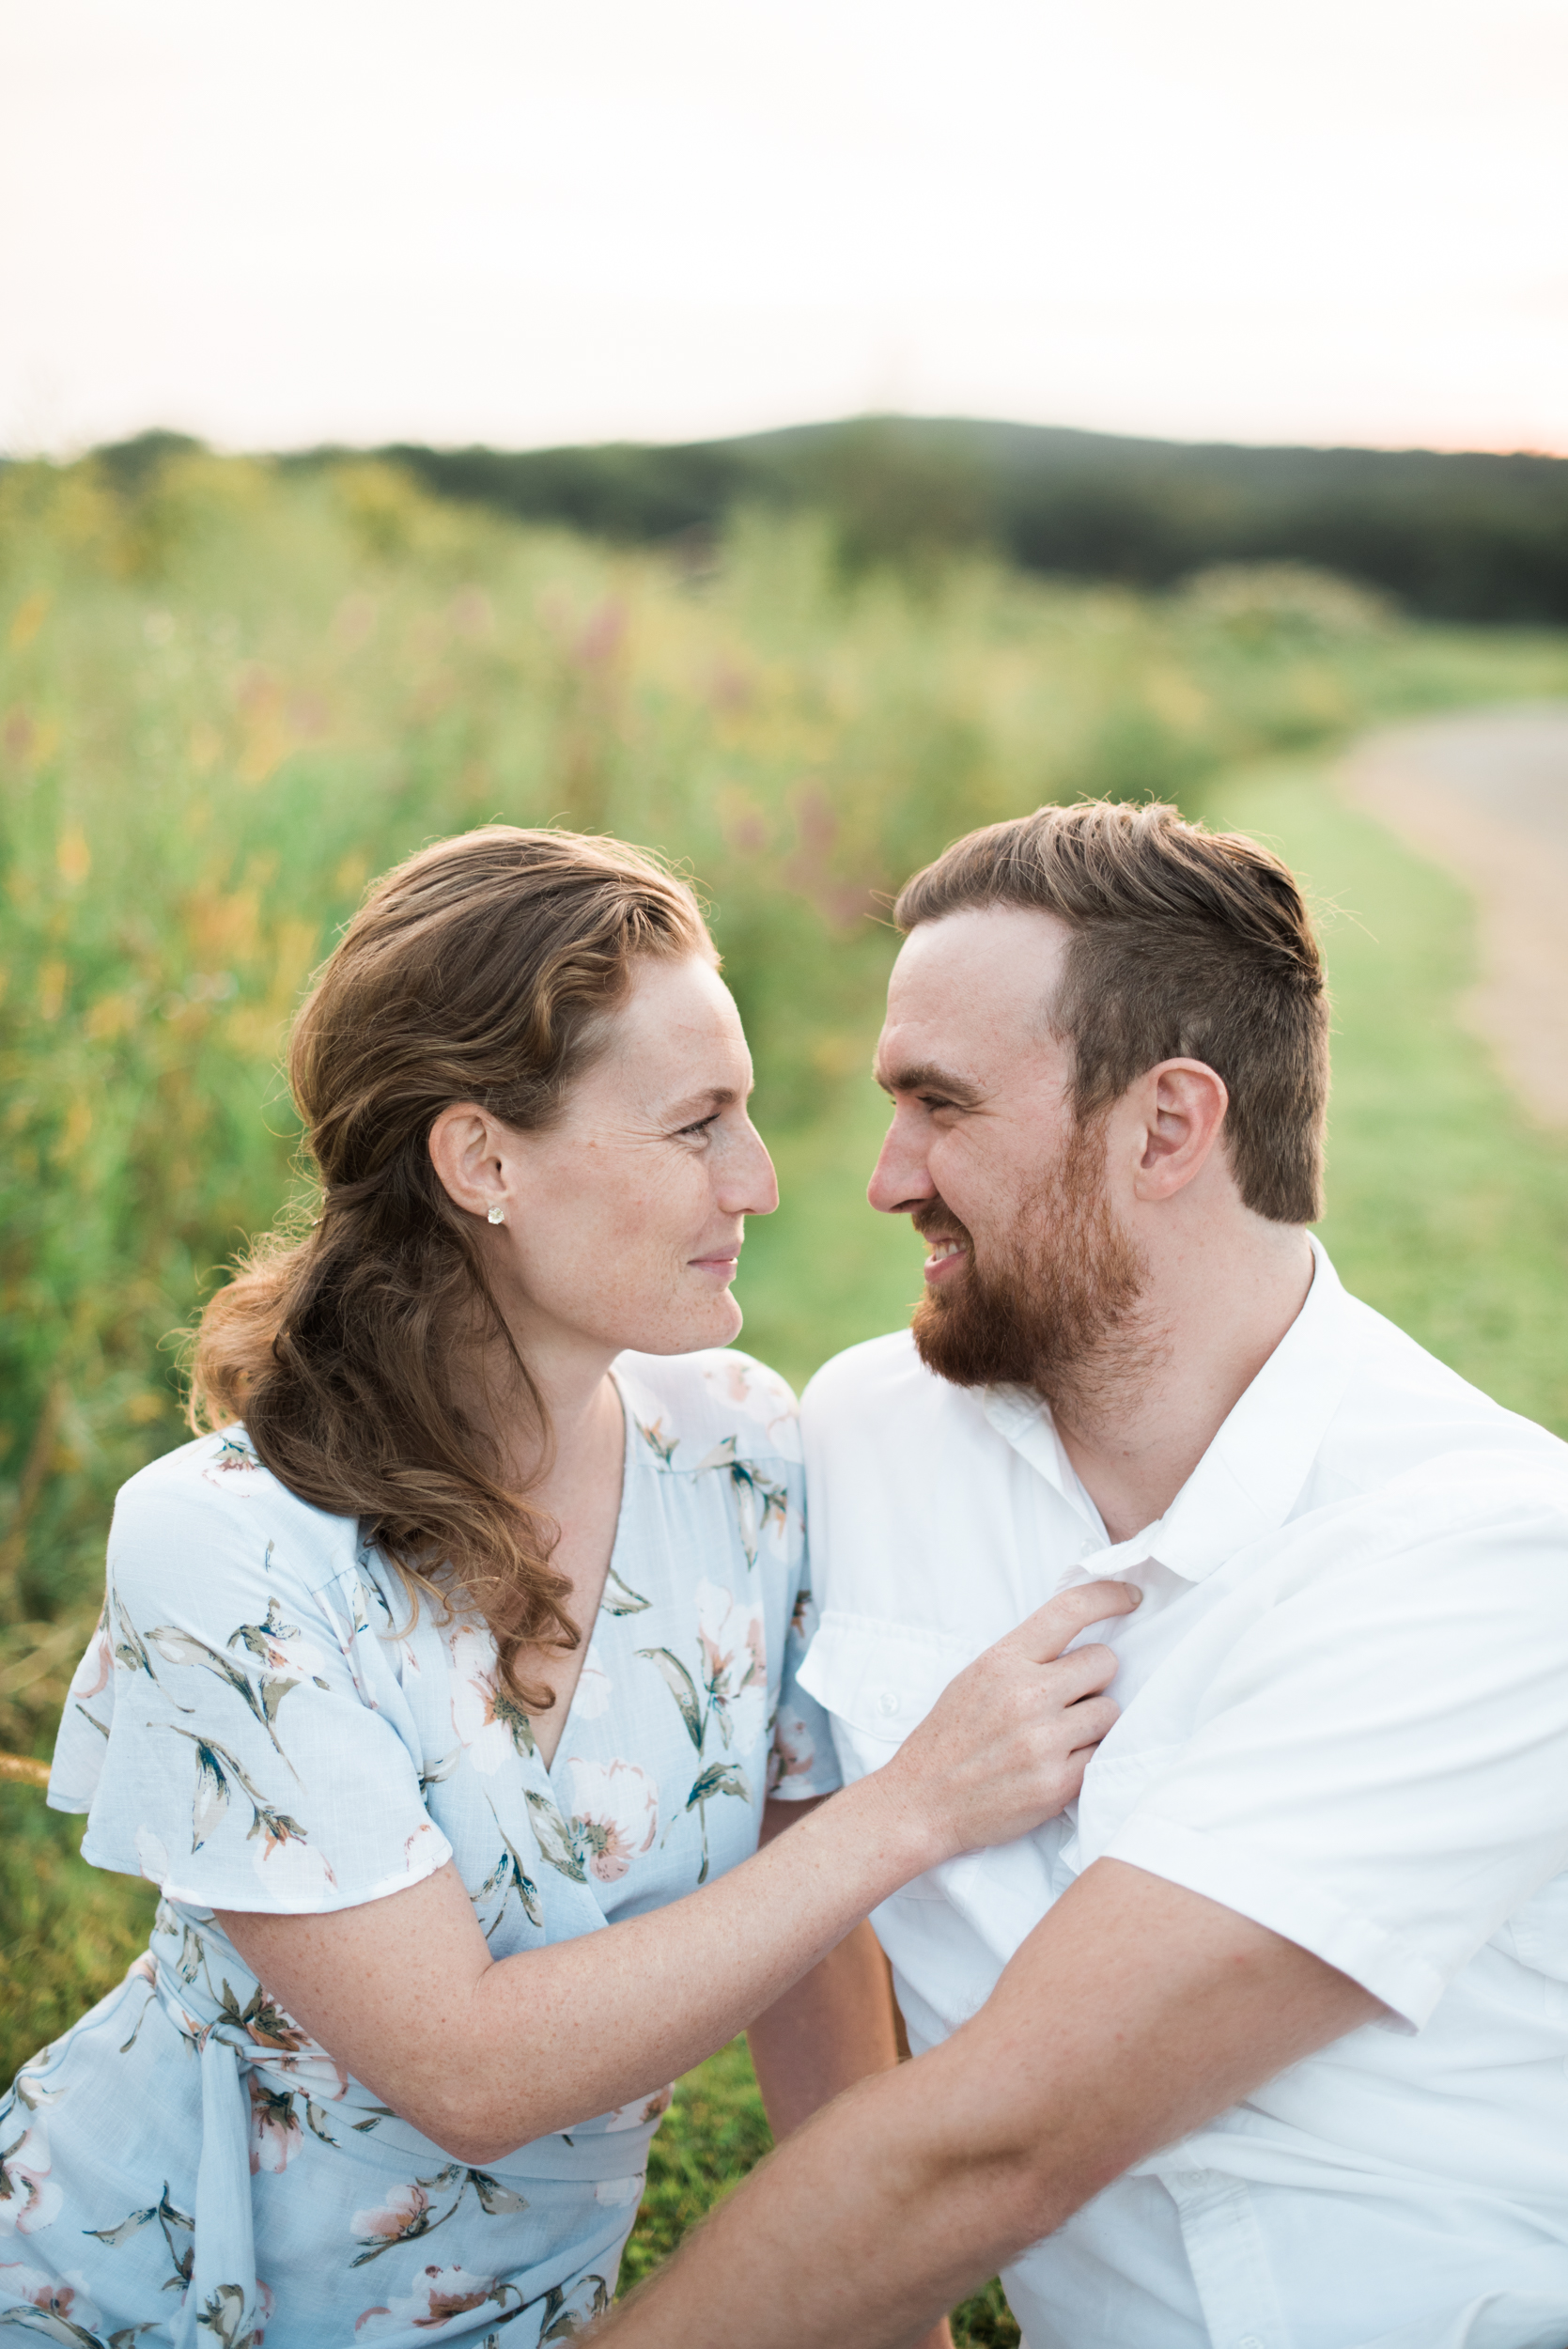 Intimate Wedding Photography in Western MA